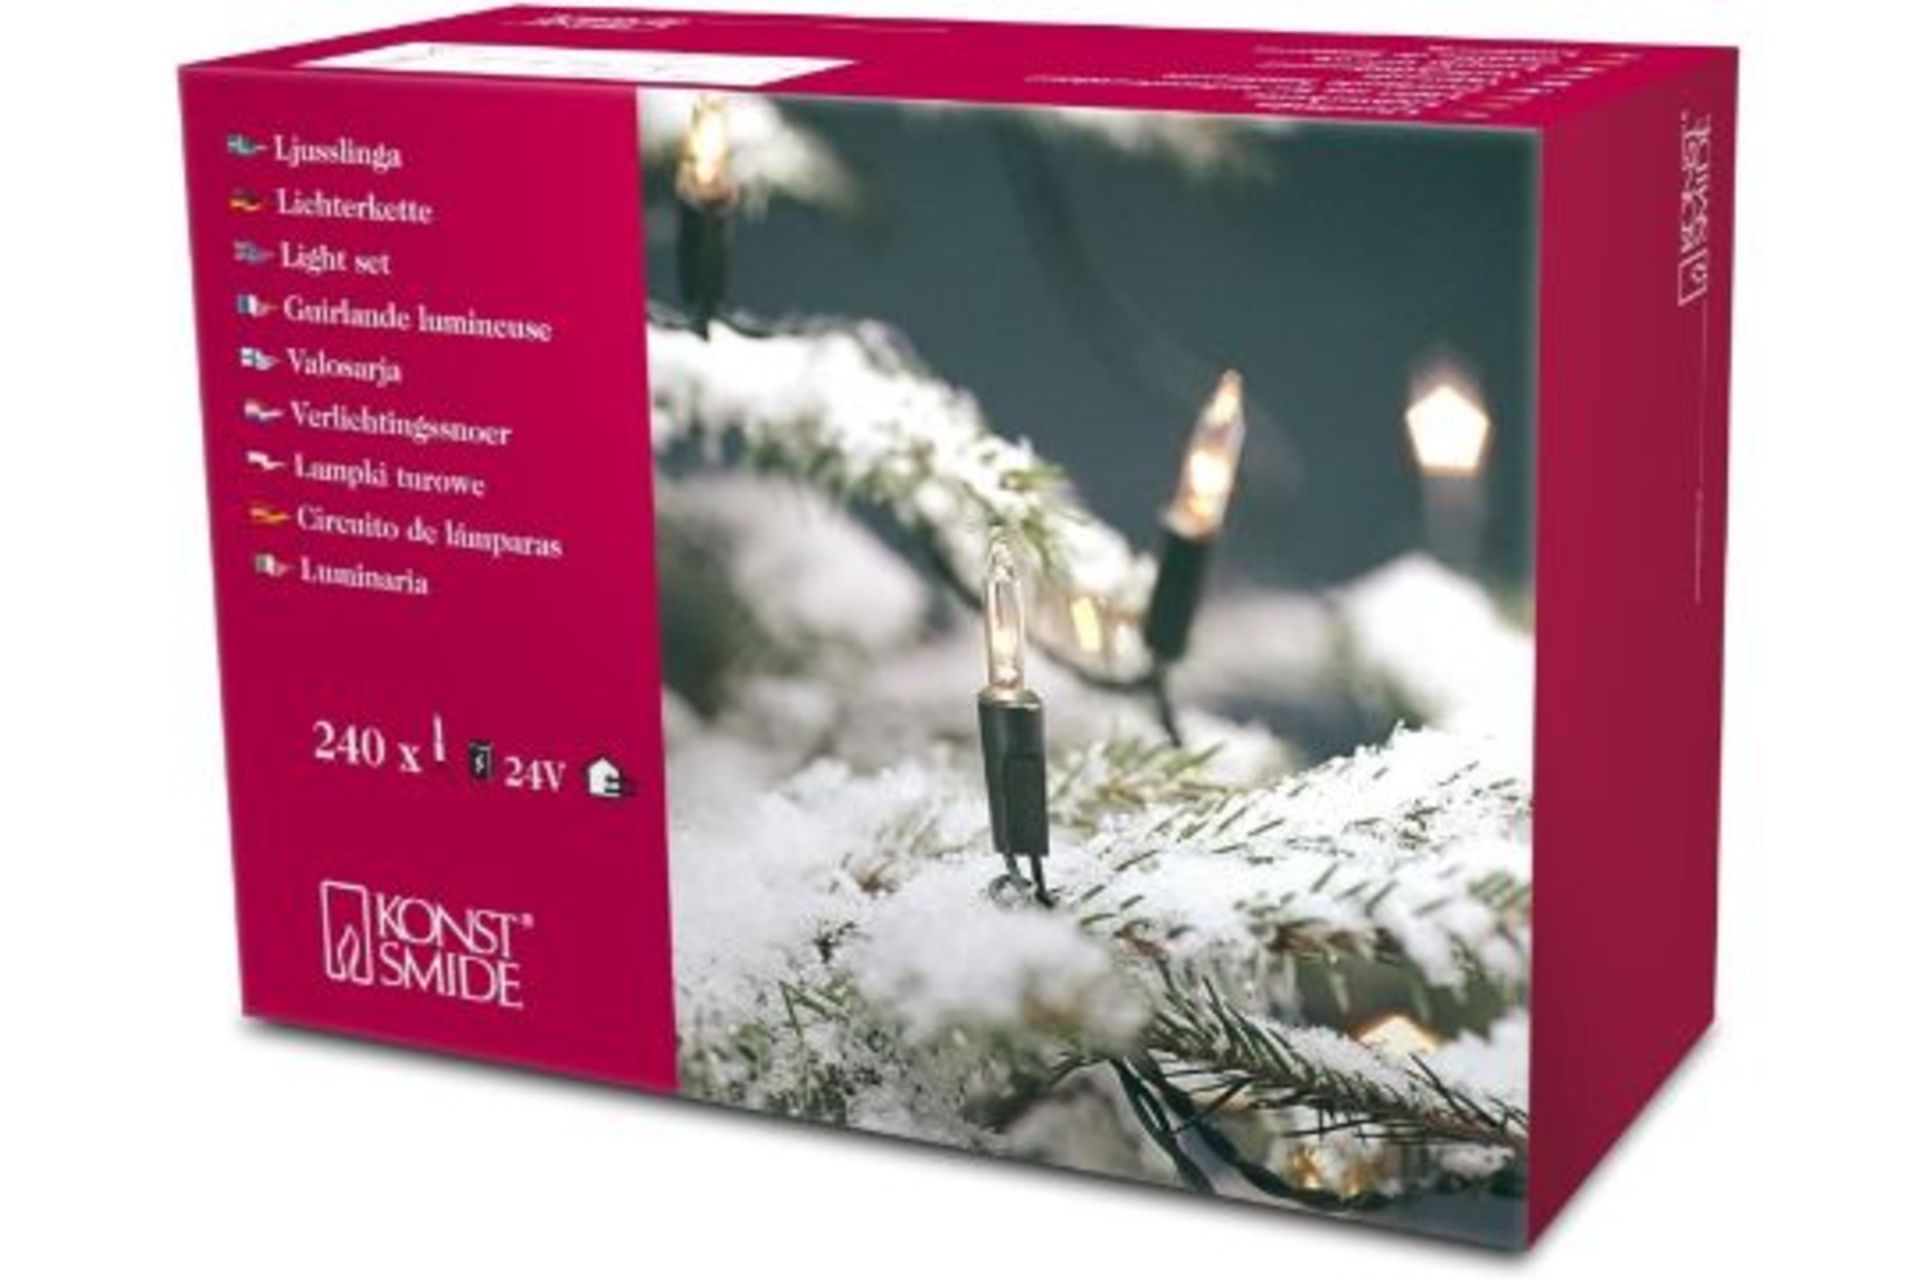 12 x NEW BOXED SETS OF Konstsmide Fairy Lights. RRP £45 PER BOX. 240 Clear Bulb Traditional Style